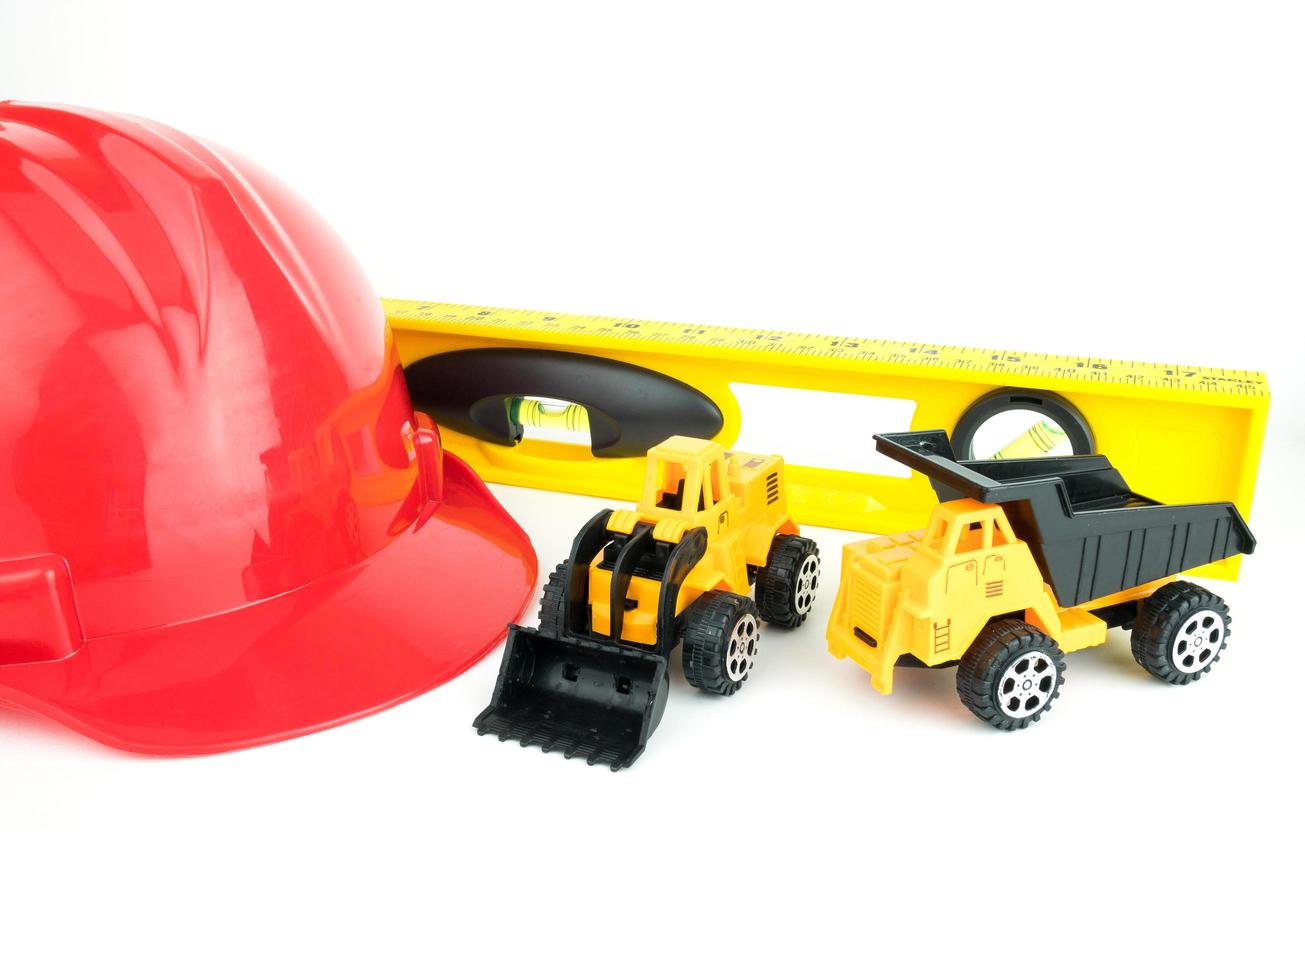 Red safety helmet with Dump truck and Bulldozers toy, Engineering construction concept photo